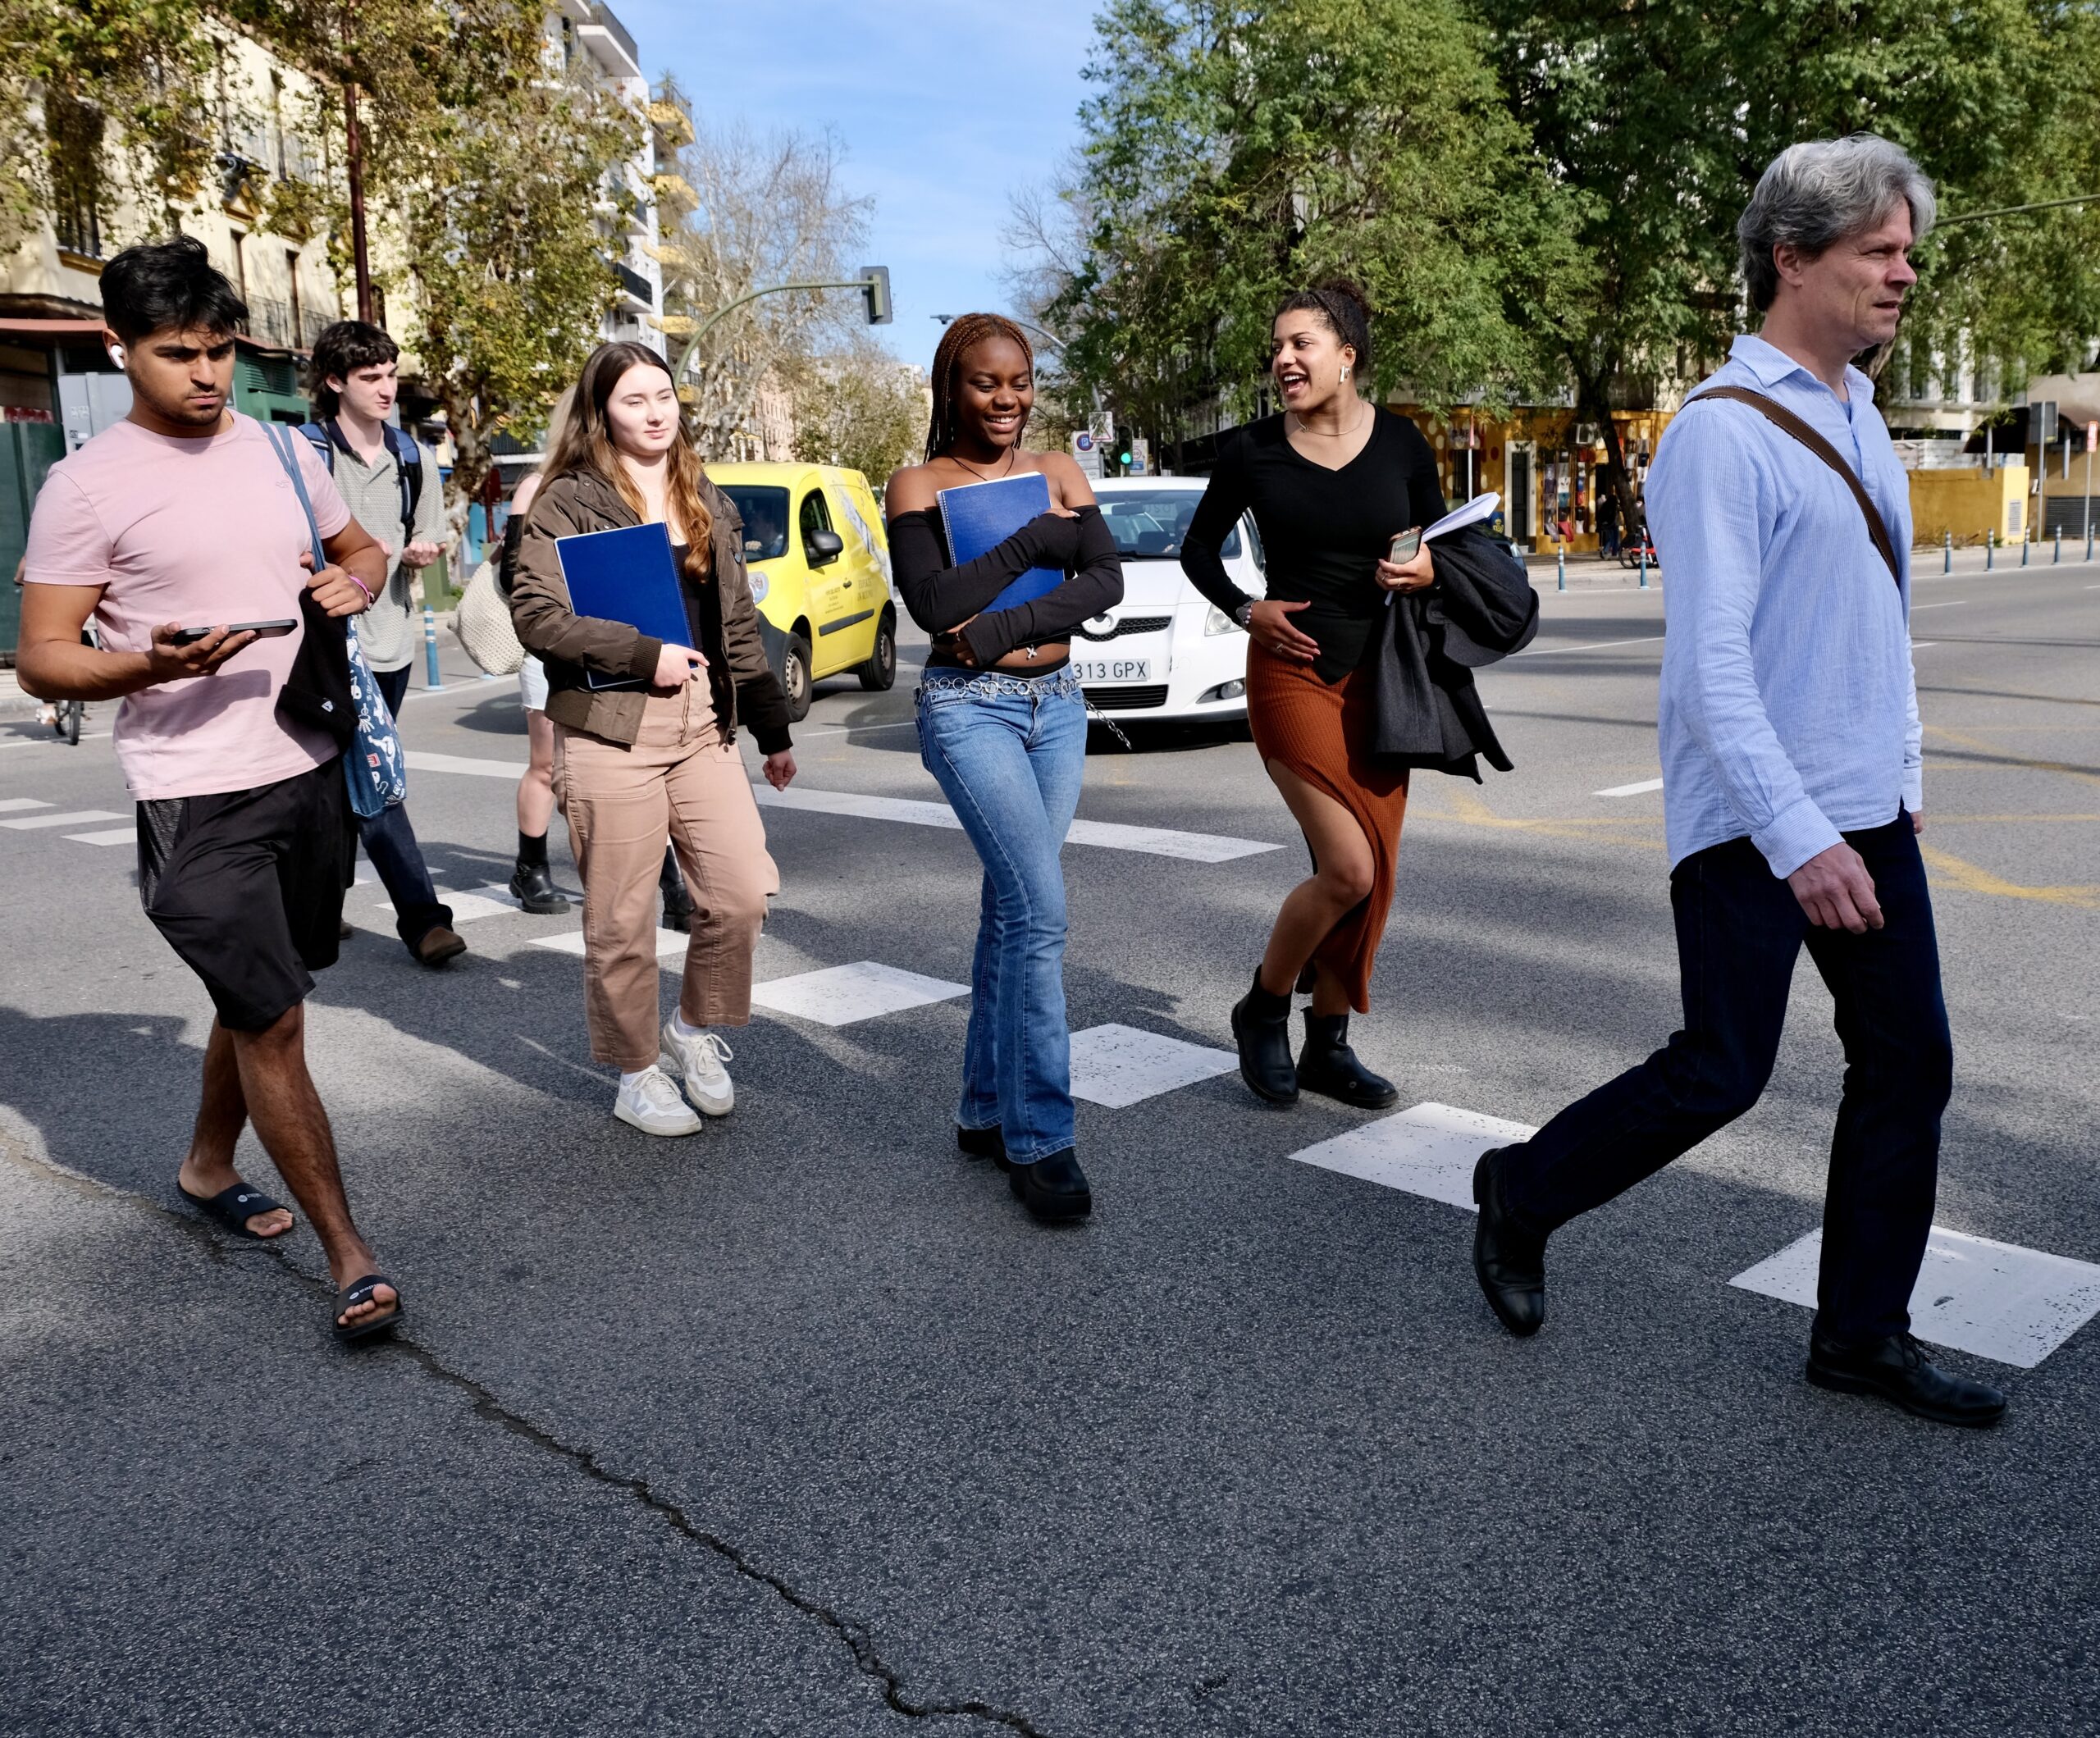 Prof. in Spain walking with students.